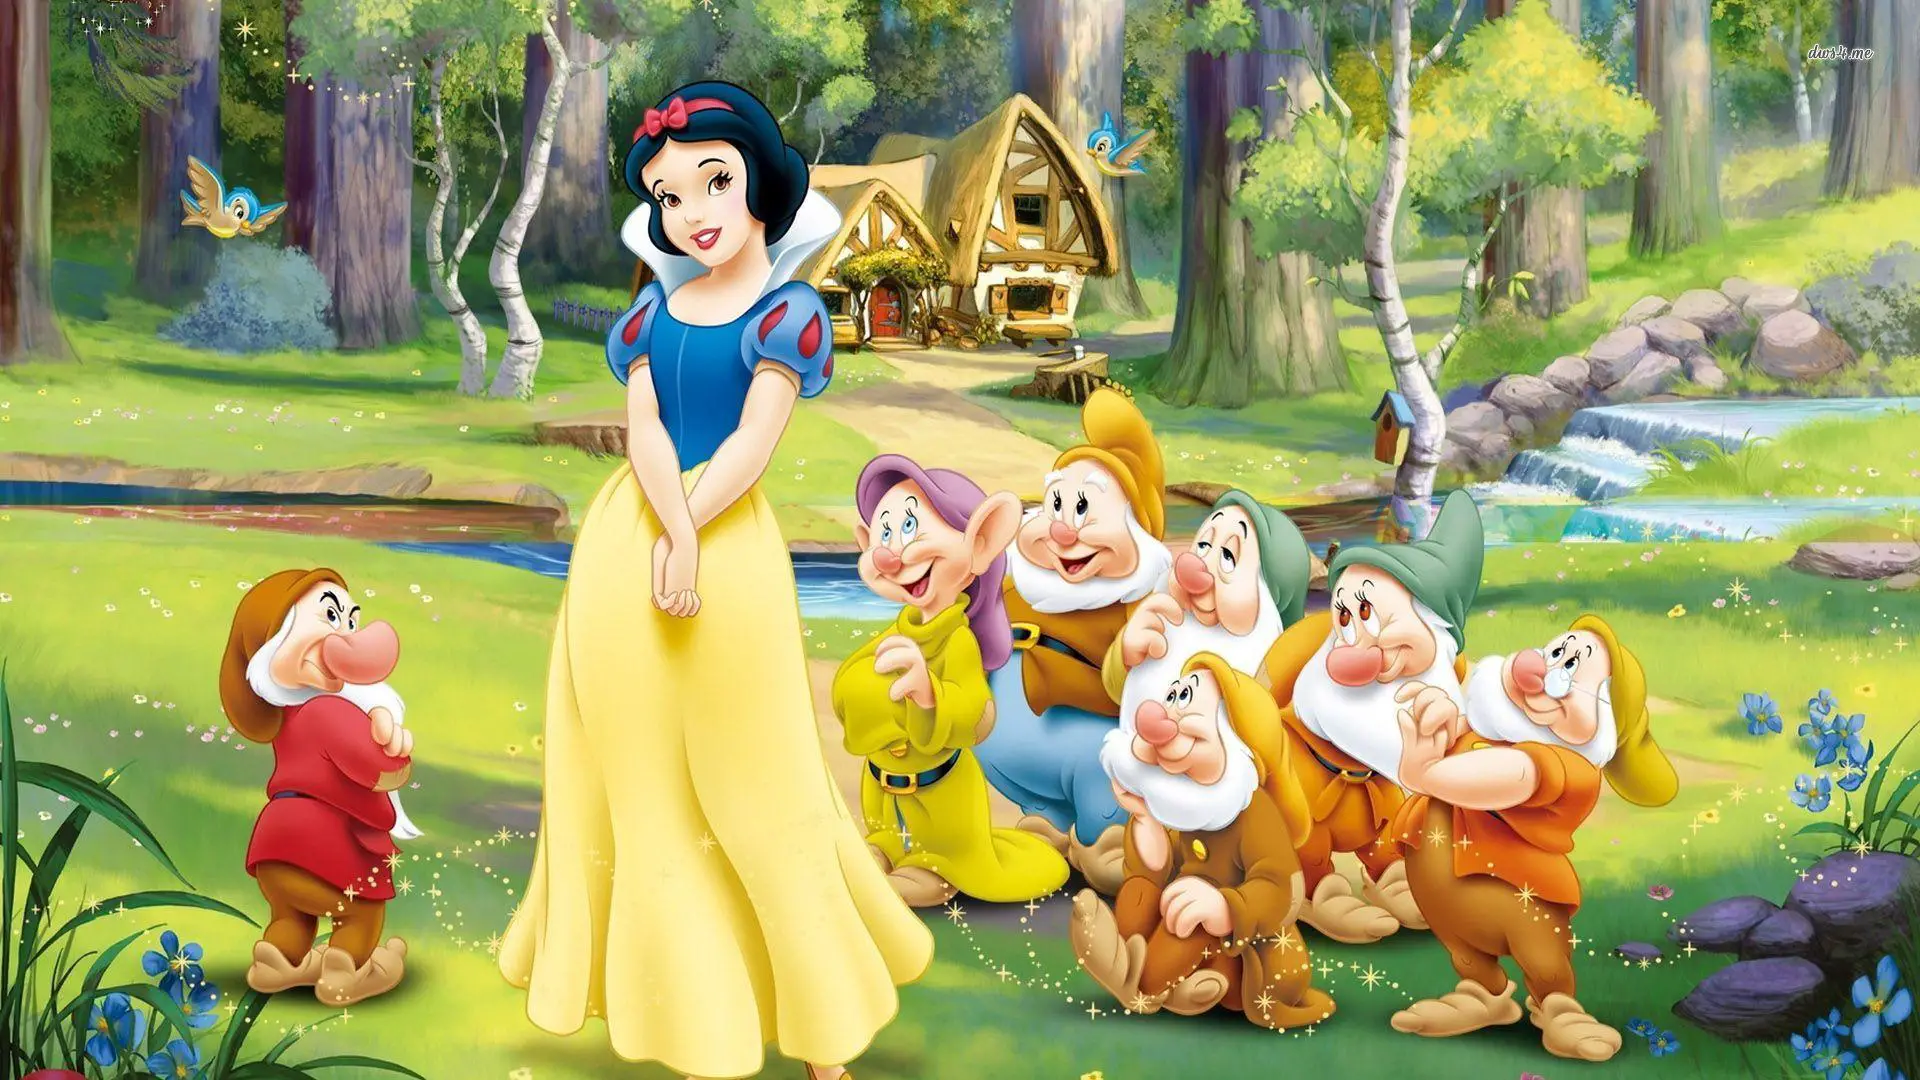 snow-white-and-the-seven-dwarfs